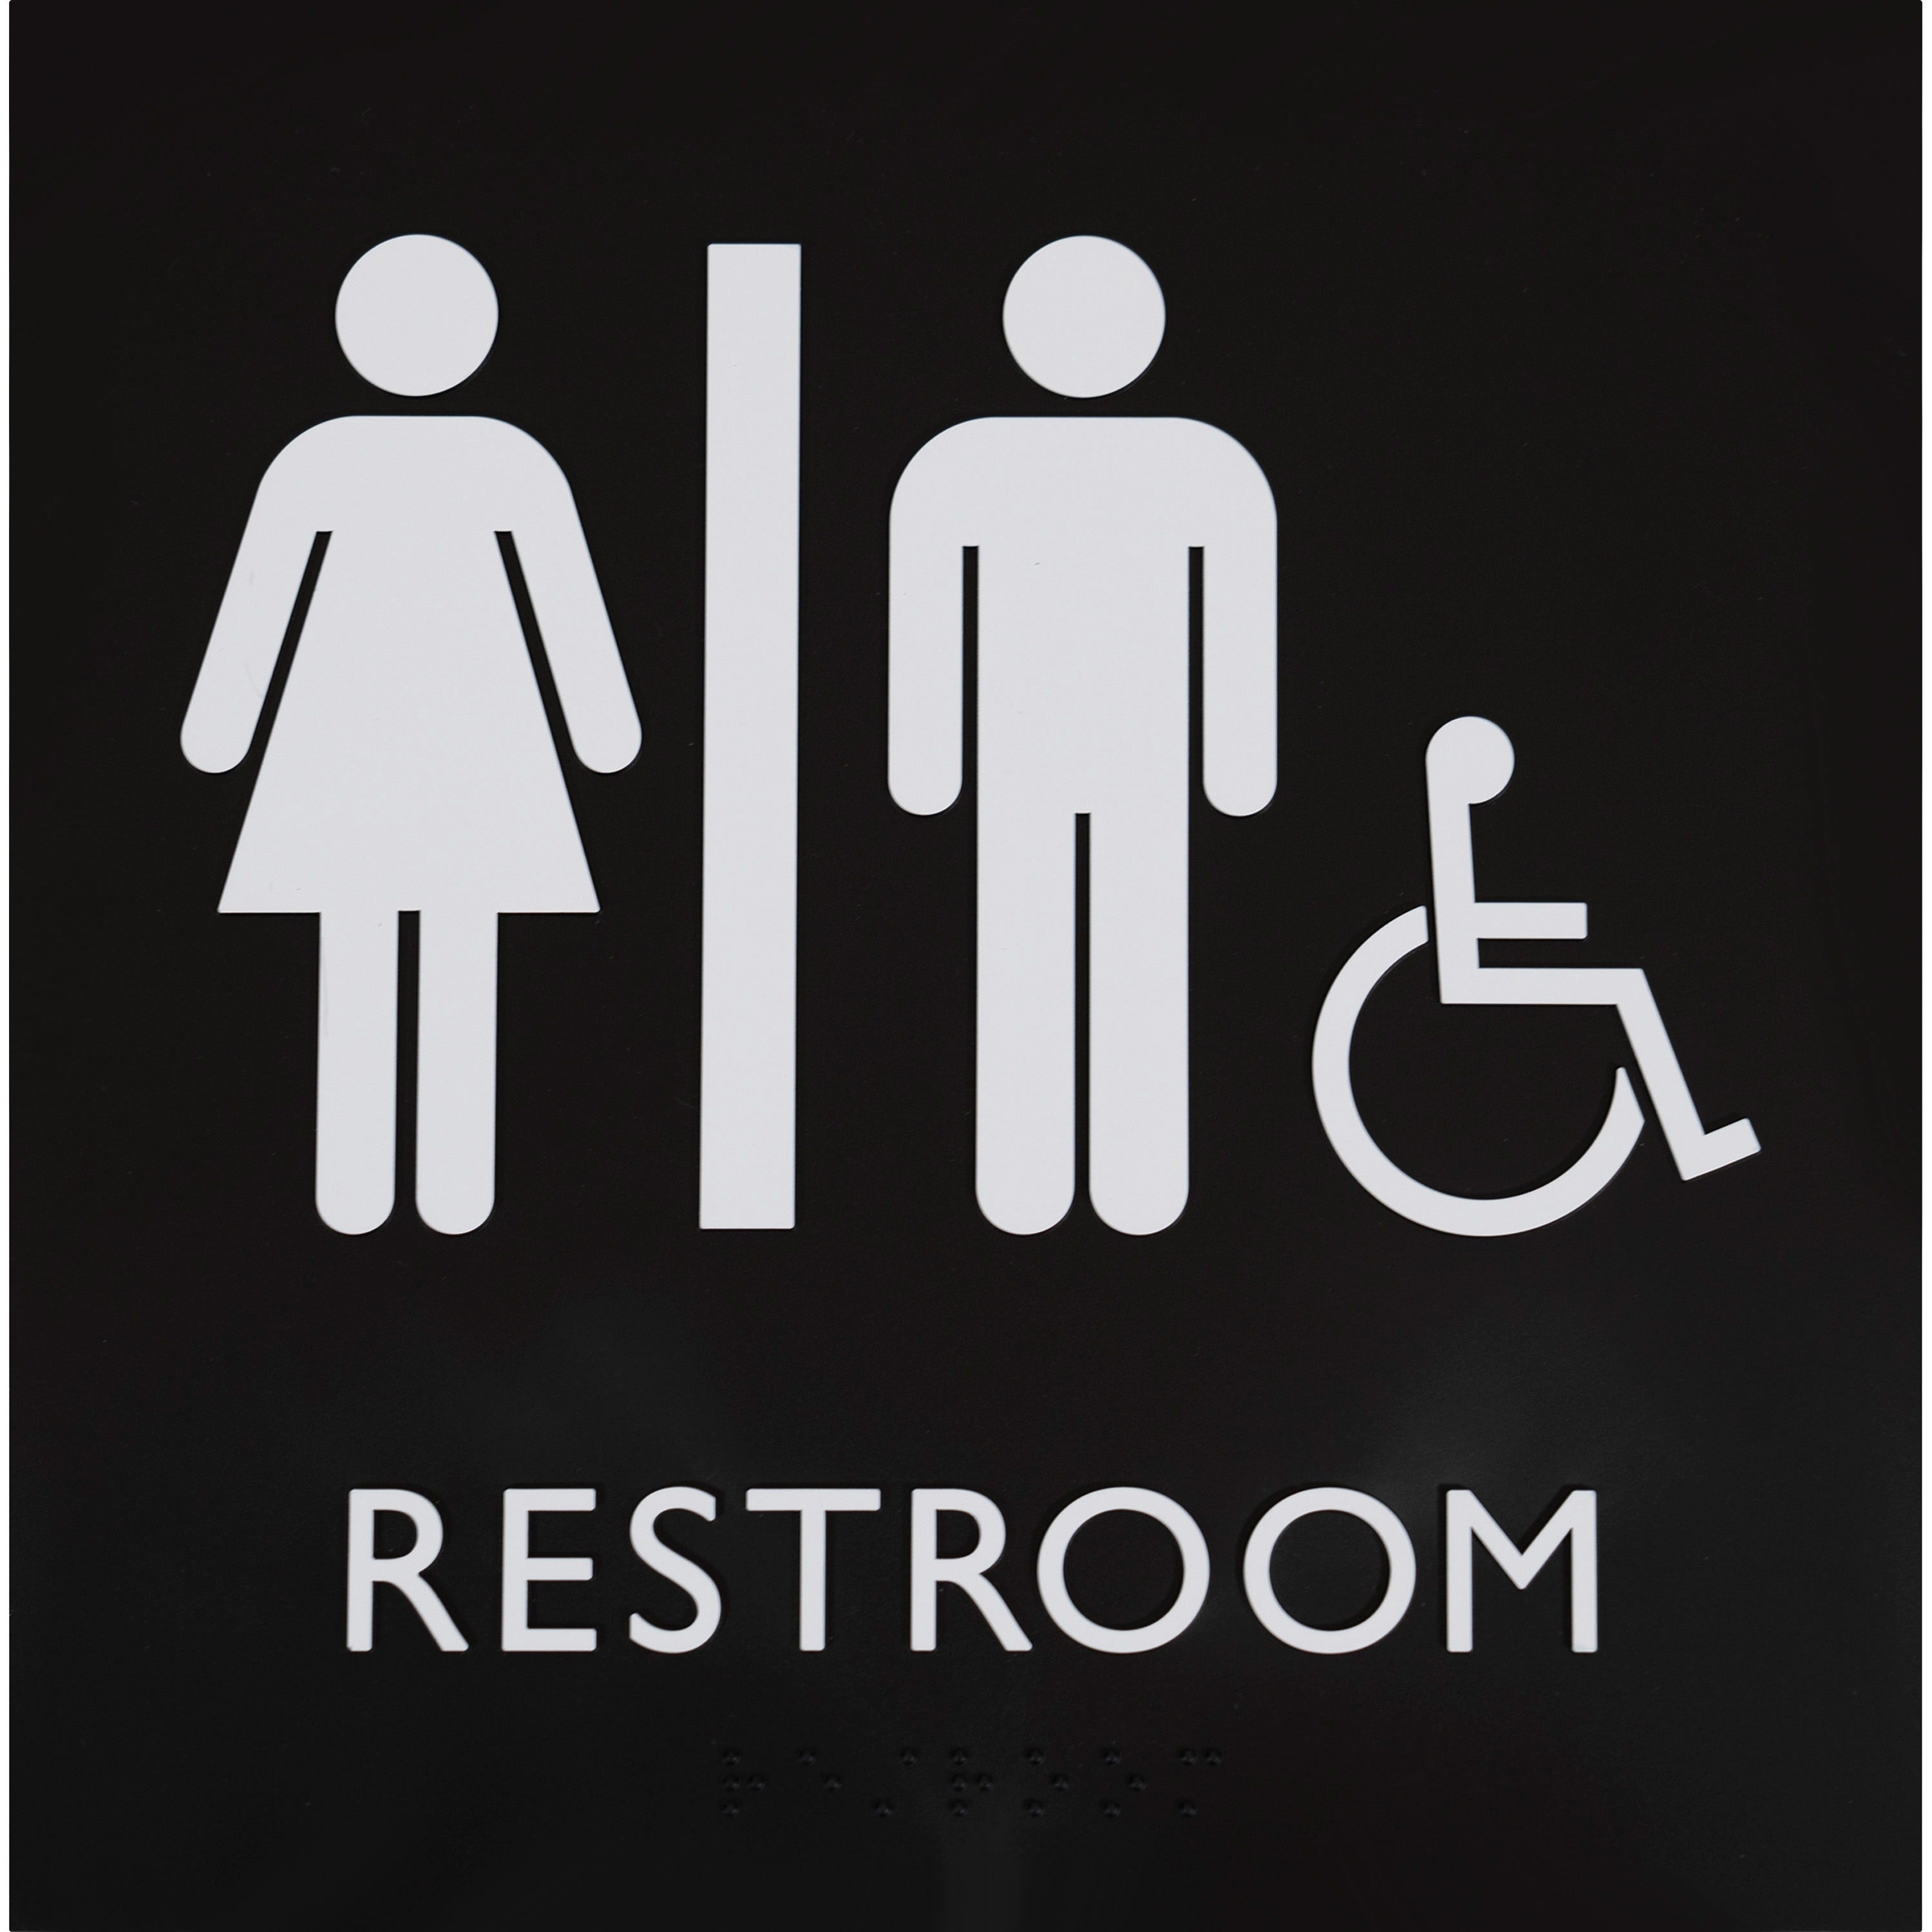 lorell-unisex-handicap-restroom-sign-1-each-8-width-x-8-height-square-shape-easy-readability-injection-molded-plastic-black-black_llr02655 - 1